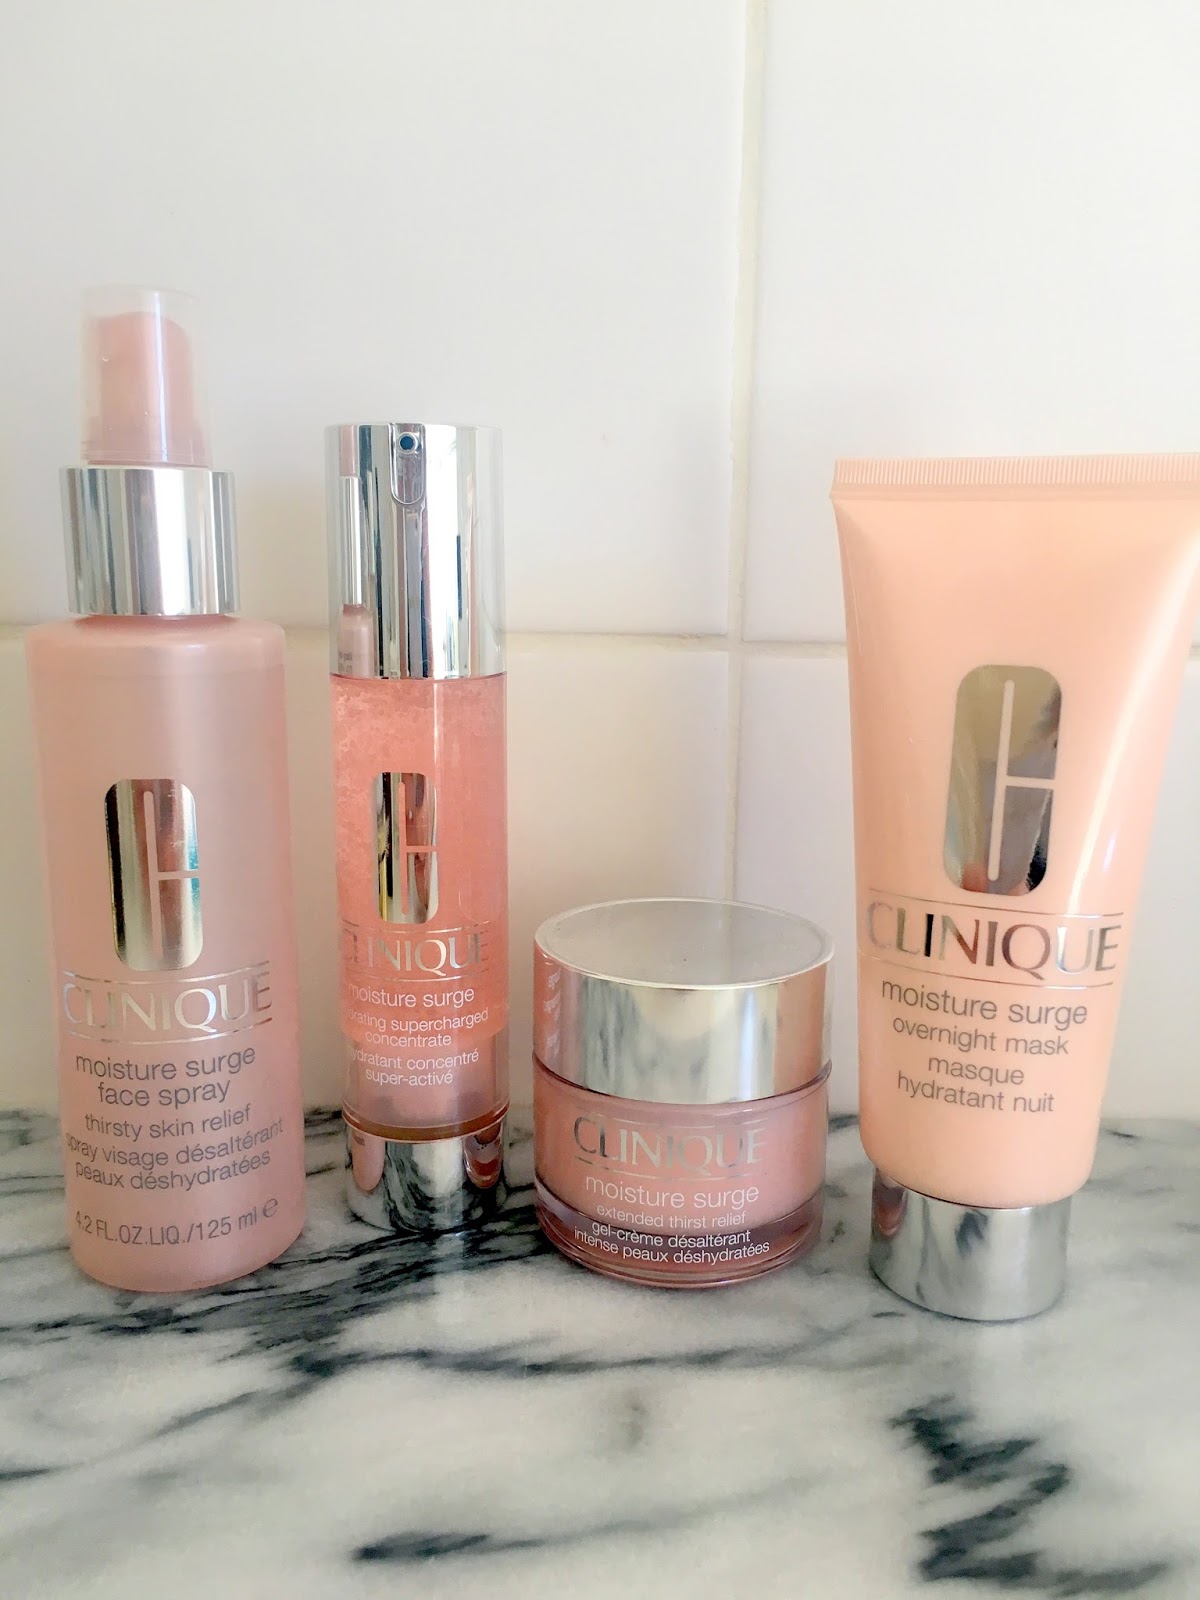 Kiss, Blush and Tell: Amp up the moisture with Clinique